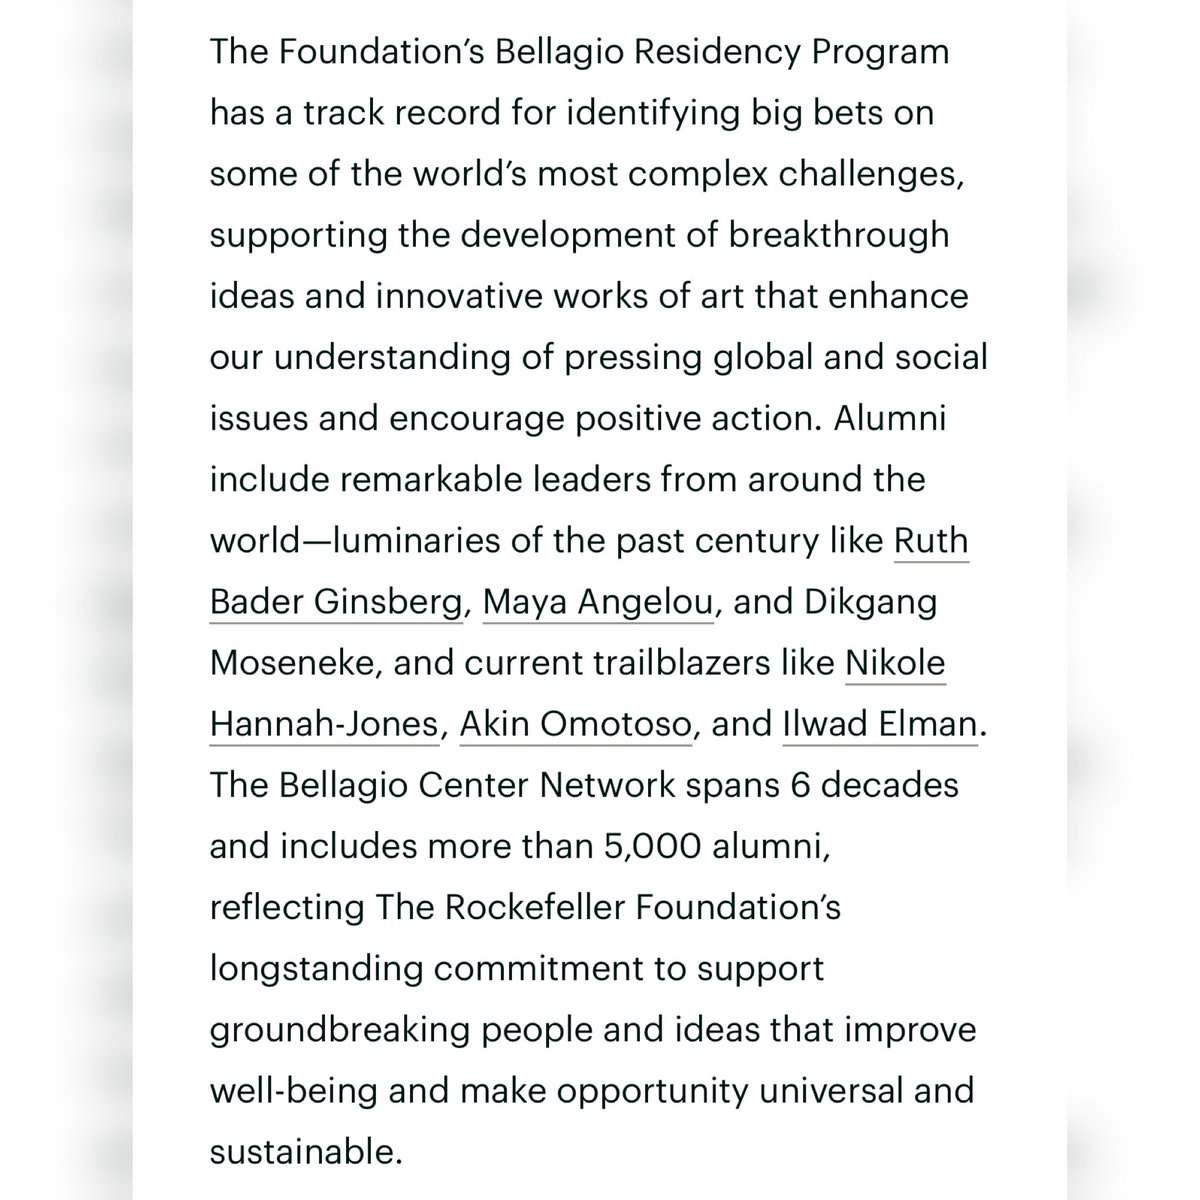 Thrilled to announce the @RockefellerFdn has invited me, alongside an extraordinary group of thinkers from various fields to be a 2024 #RFBellagio Center resident with my project - LA PYRAMIDE: A CELEBRATION OF DARK BODIES. So honored! Learn more here:
rockfound.link/3ZIhTGL